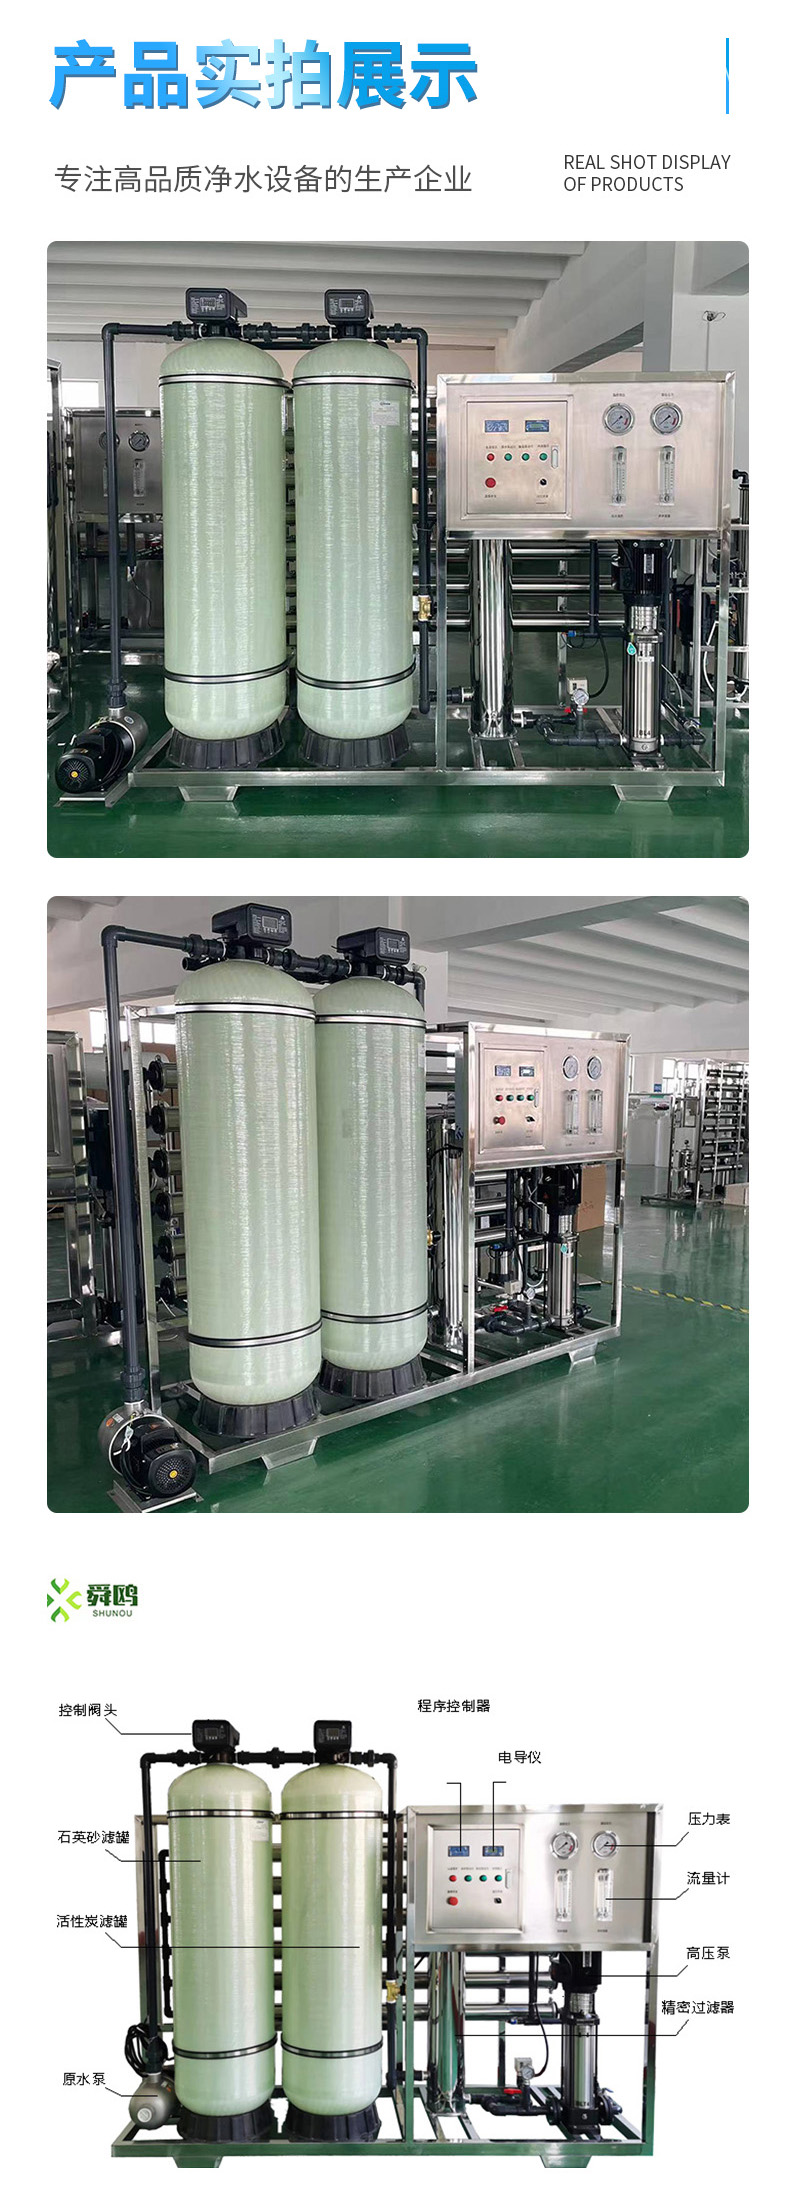 New Rural Direct Drinking Water Equipment 3-ton Reverse Osmosis Equipment Manufacturer Large Water Treatment Equipment